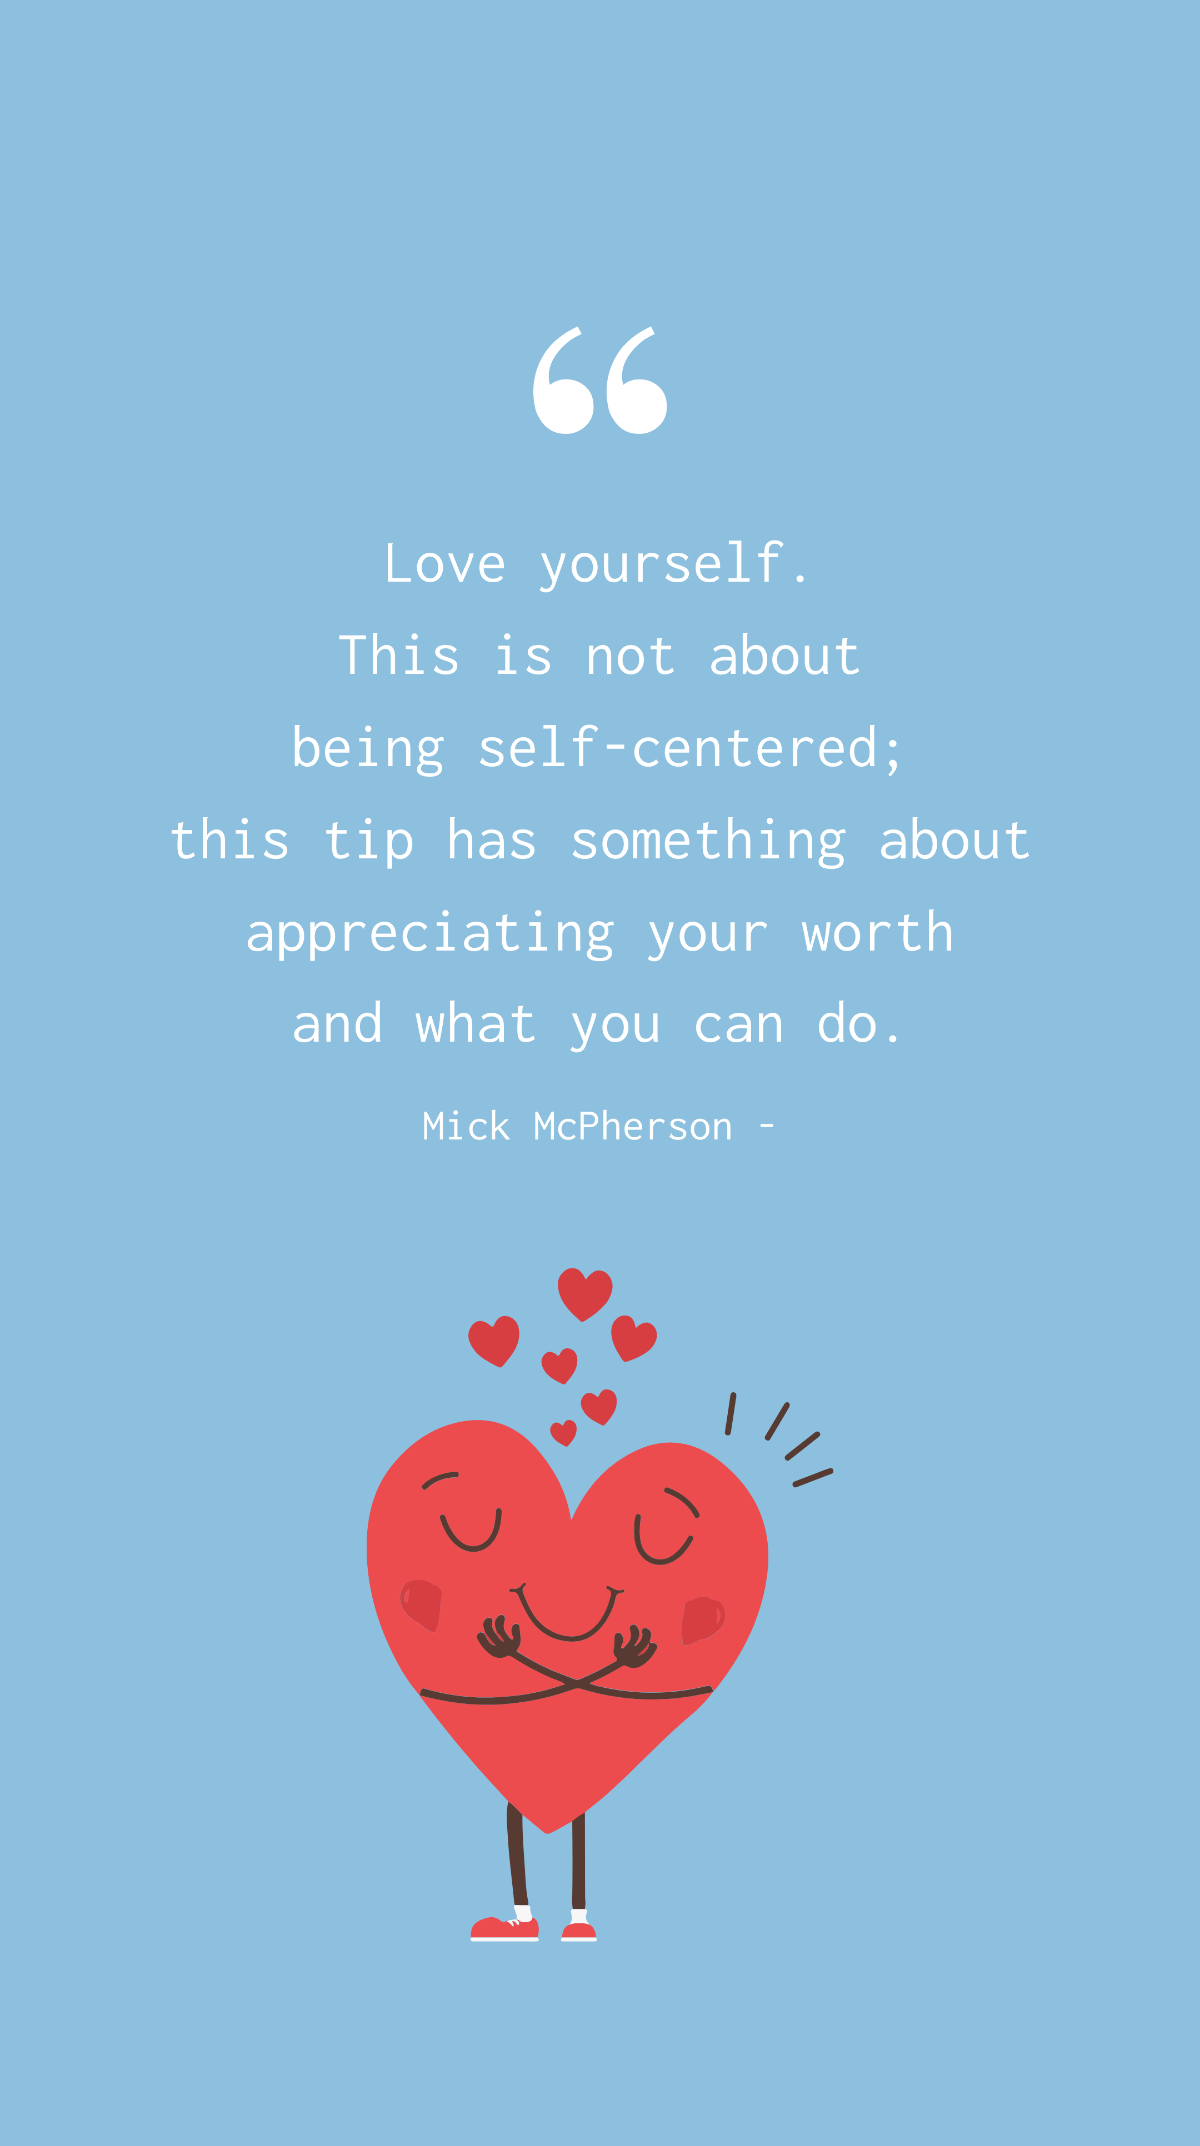 Mick McPherson - Love yourself. This is not about being self-centered; this tip has something about appreciating your worth and what you can do. Template